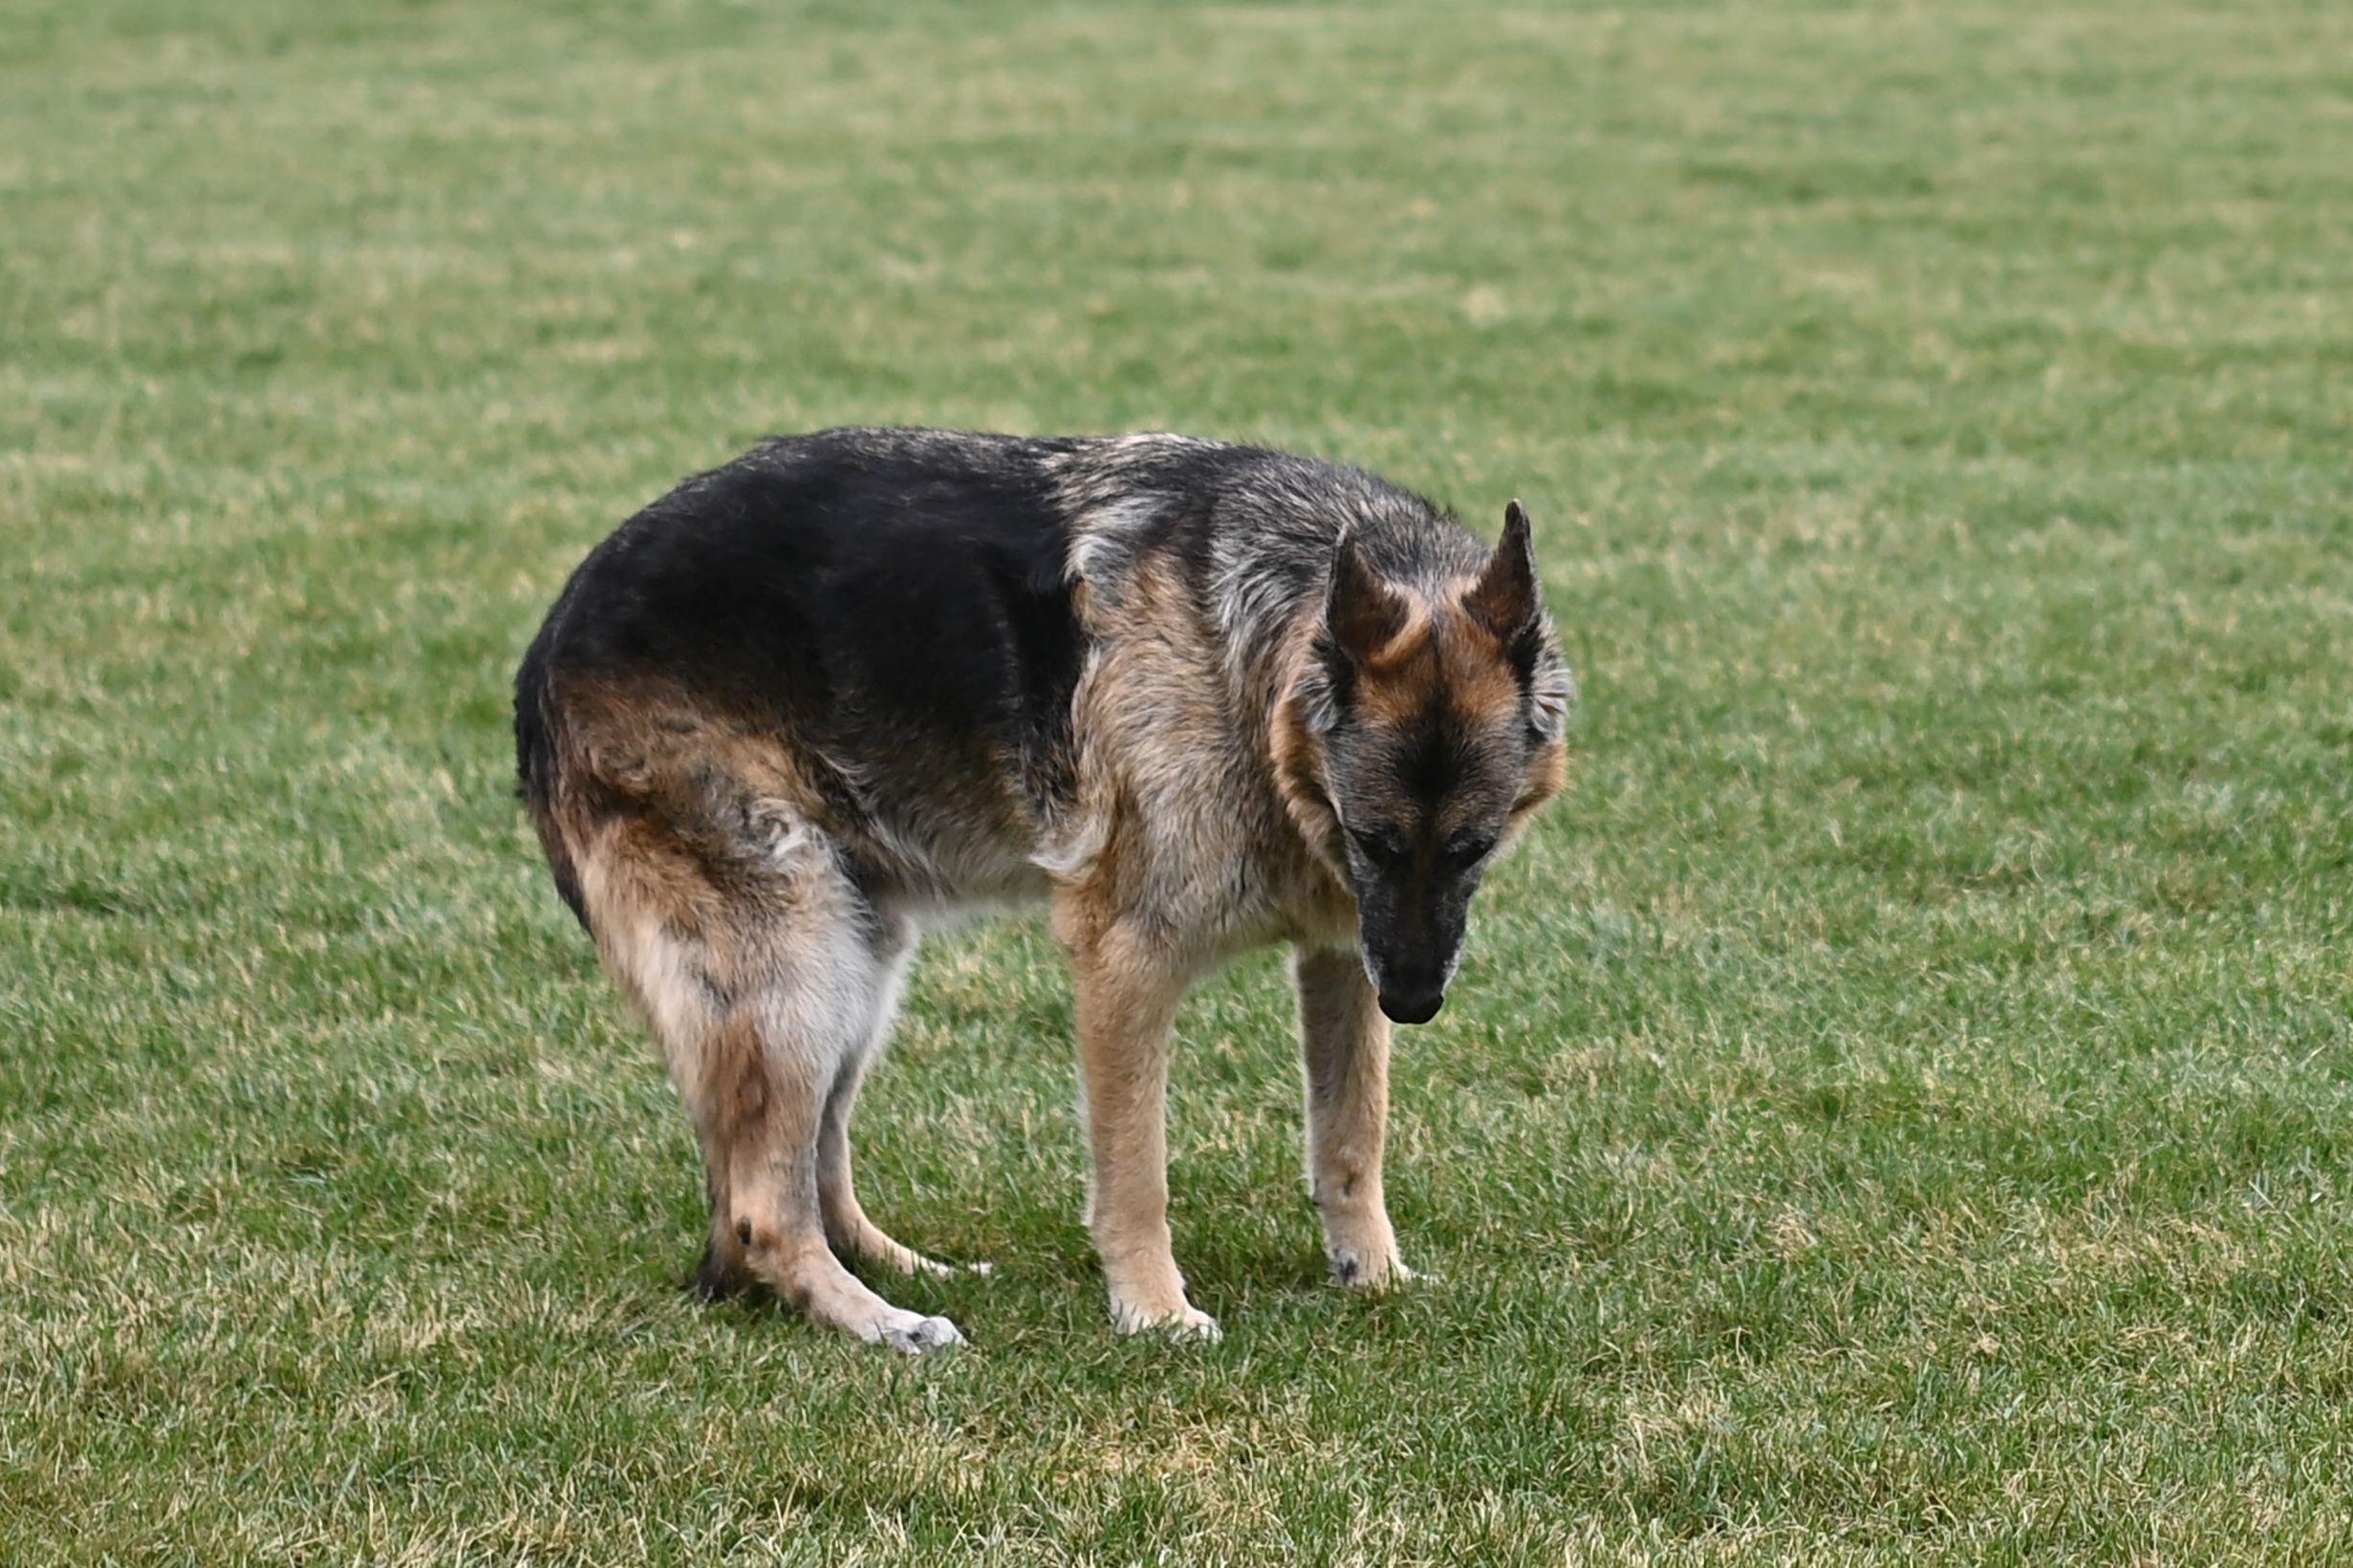 The Bidens dog Champ is seen on the South Lawn of the White House in Washington, D.C. on March 31, 2021.